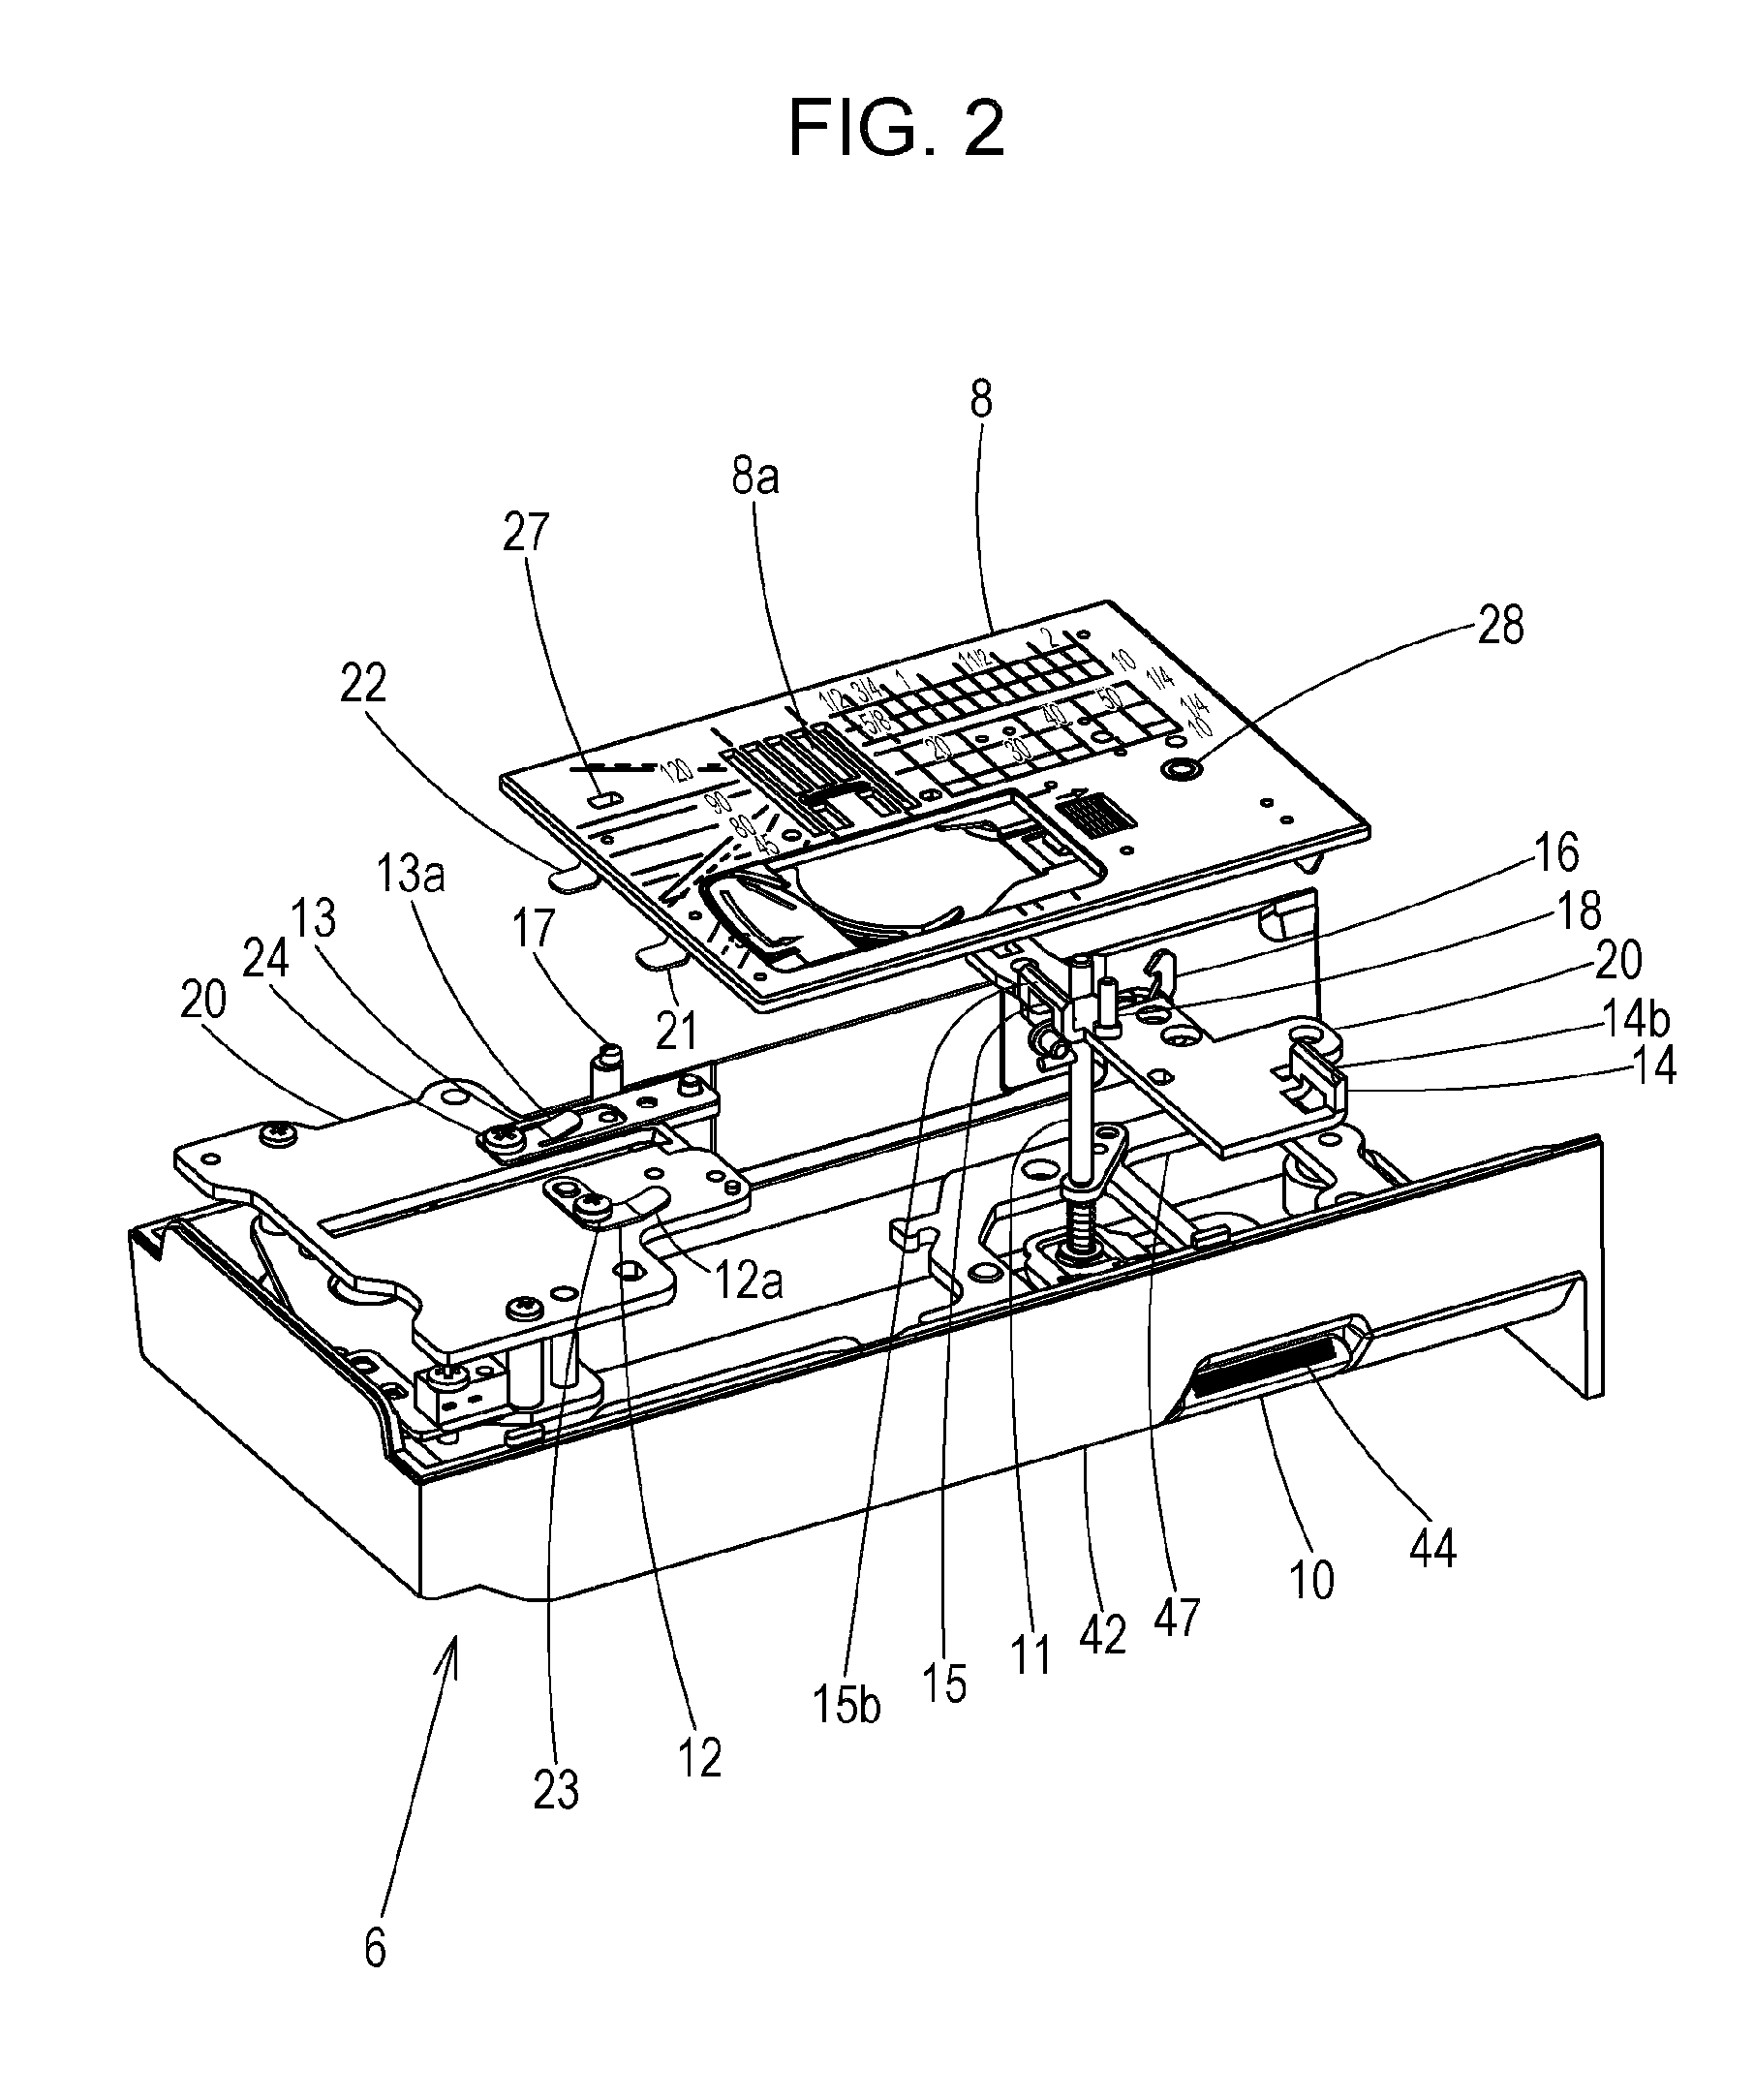 Needle plate replacement device with lock